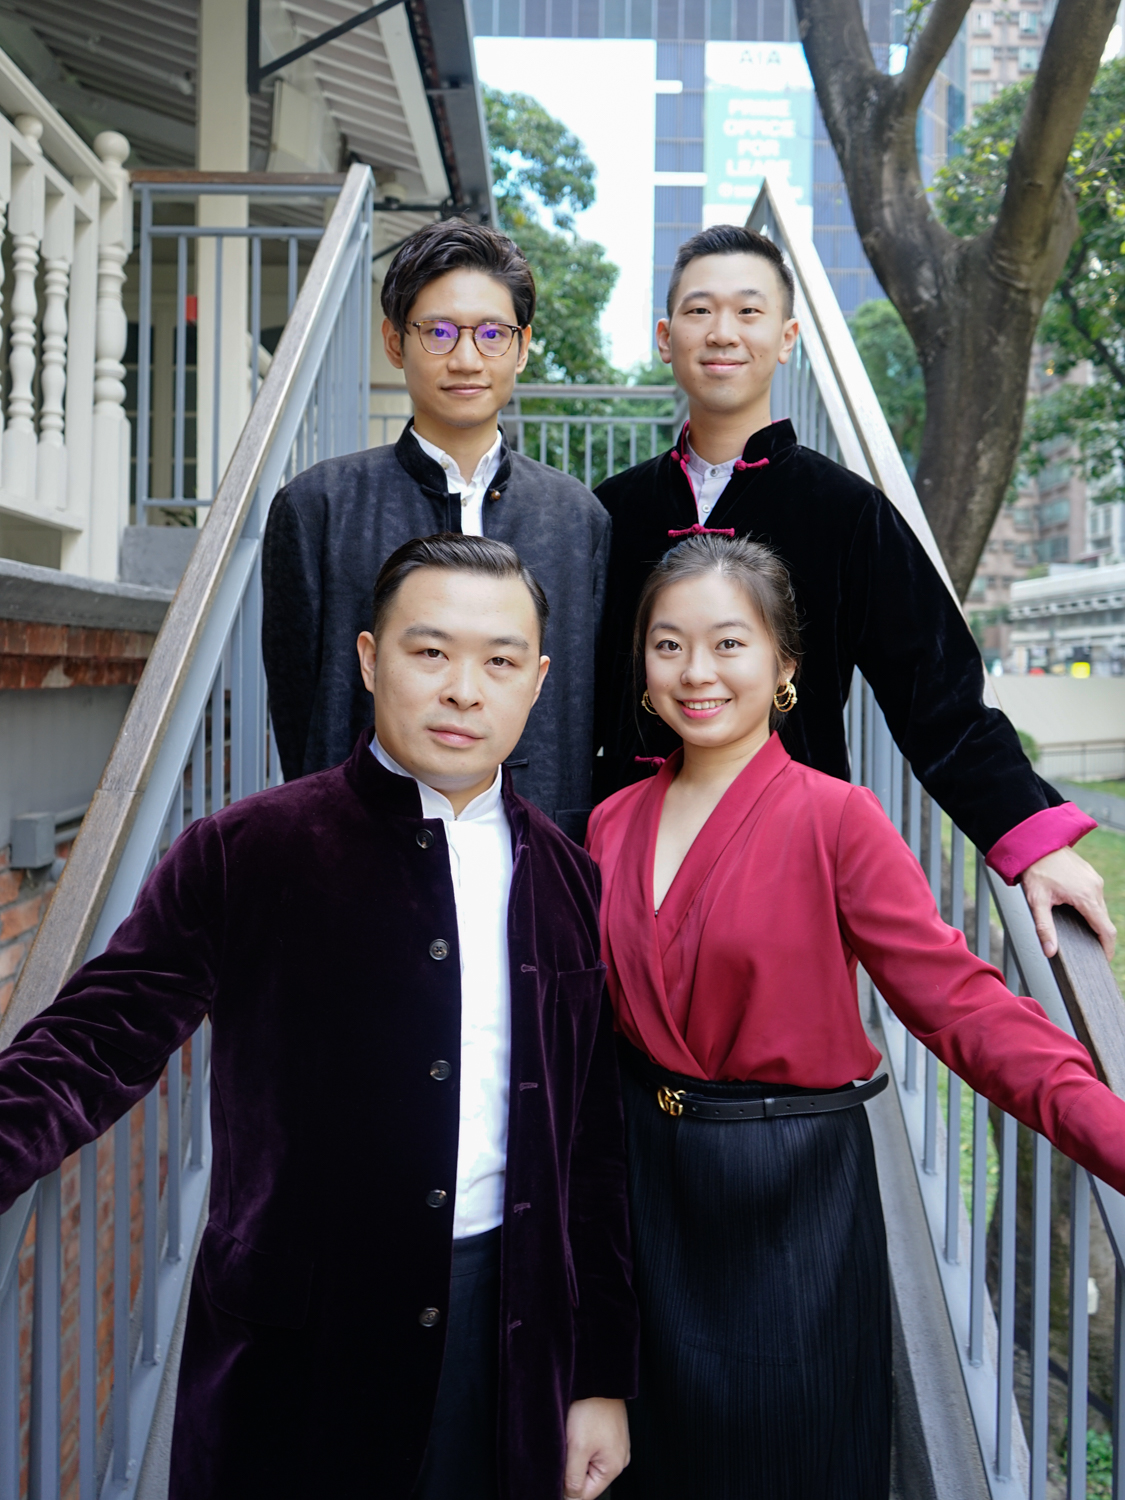 A group of people posing for a photo on a staircaseDescription automatically generated with medium confidence